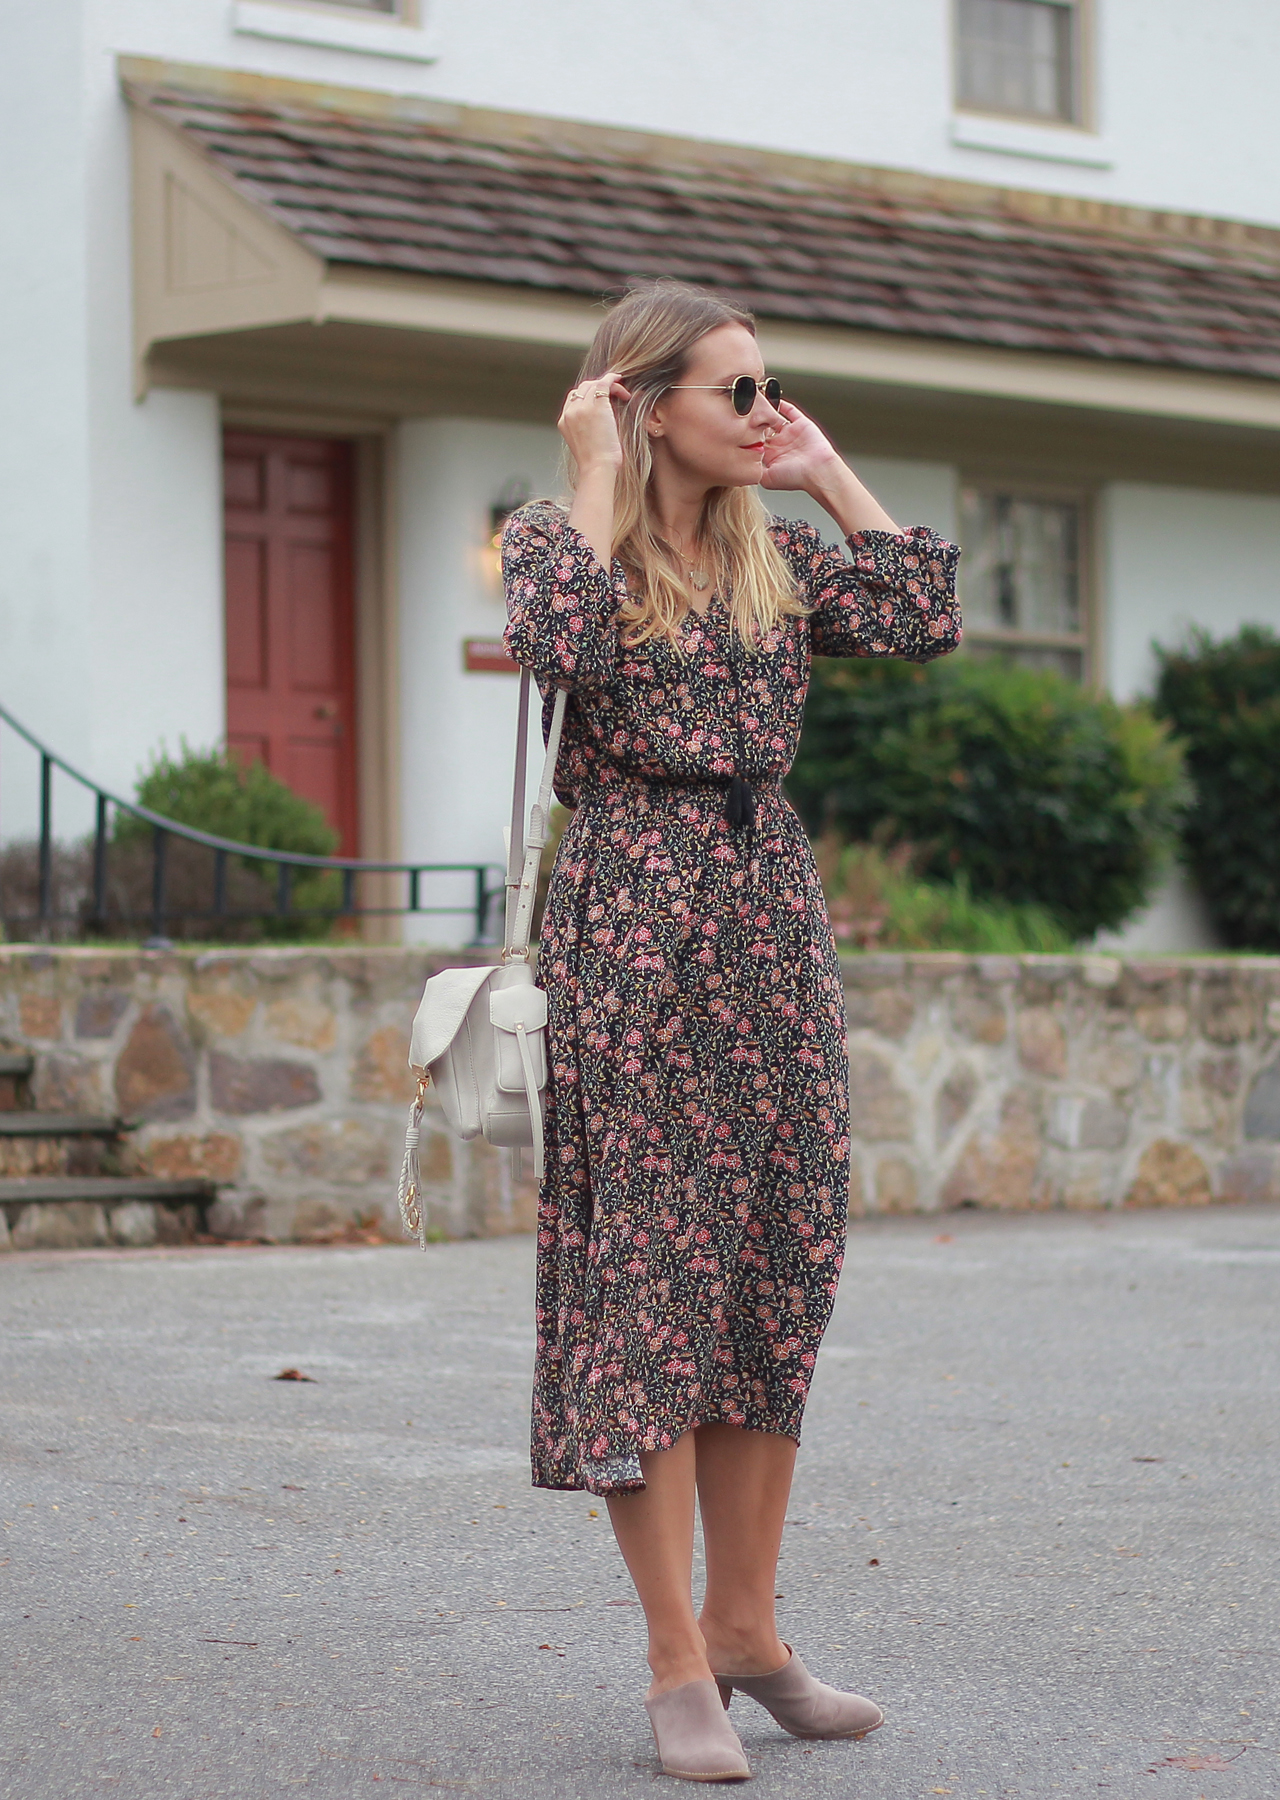 The Steele Maiden: Fall Floral Maxi with Old Navy